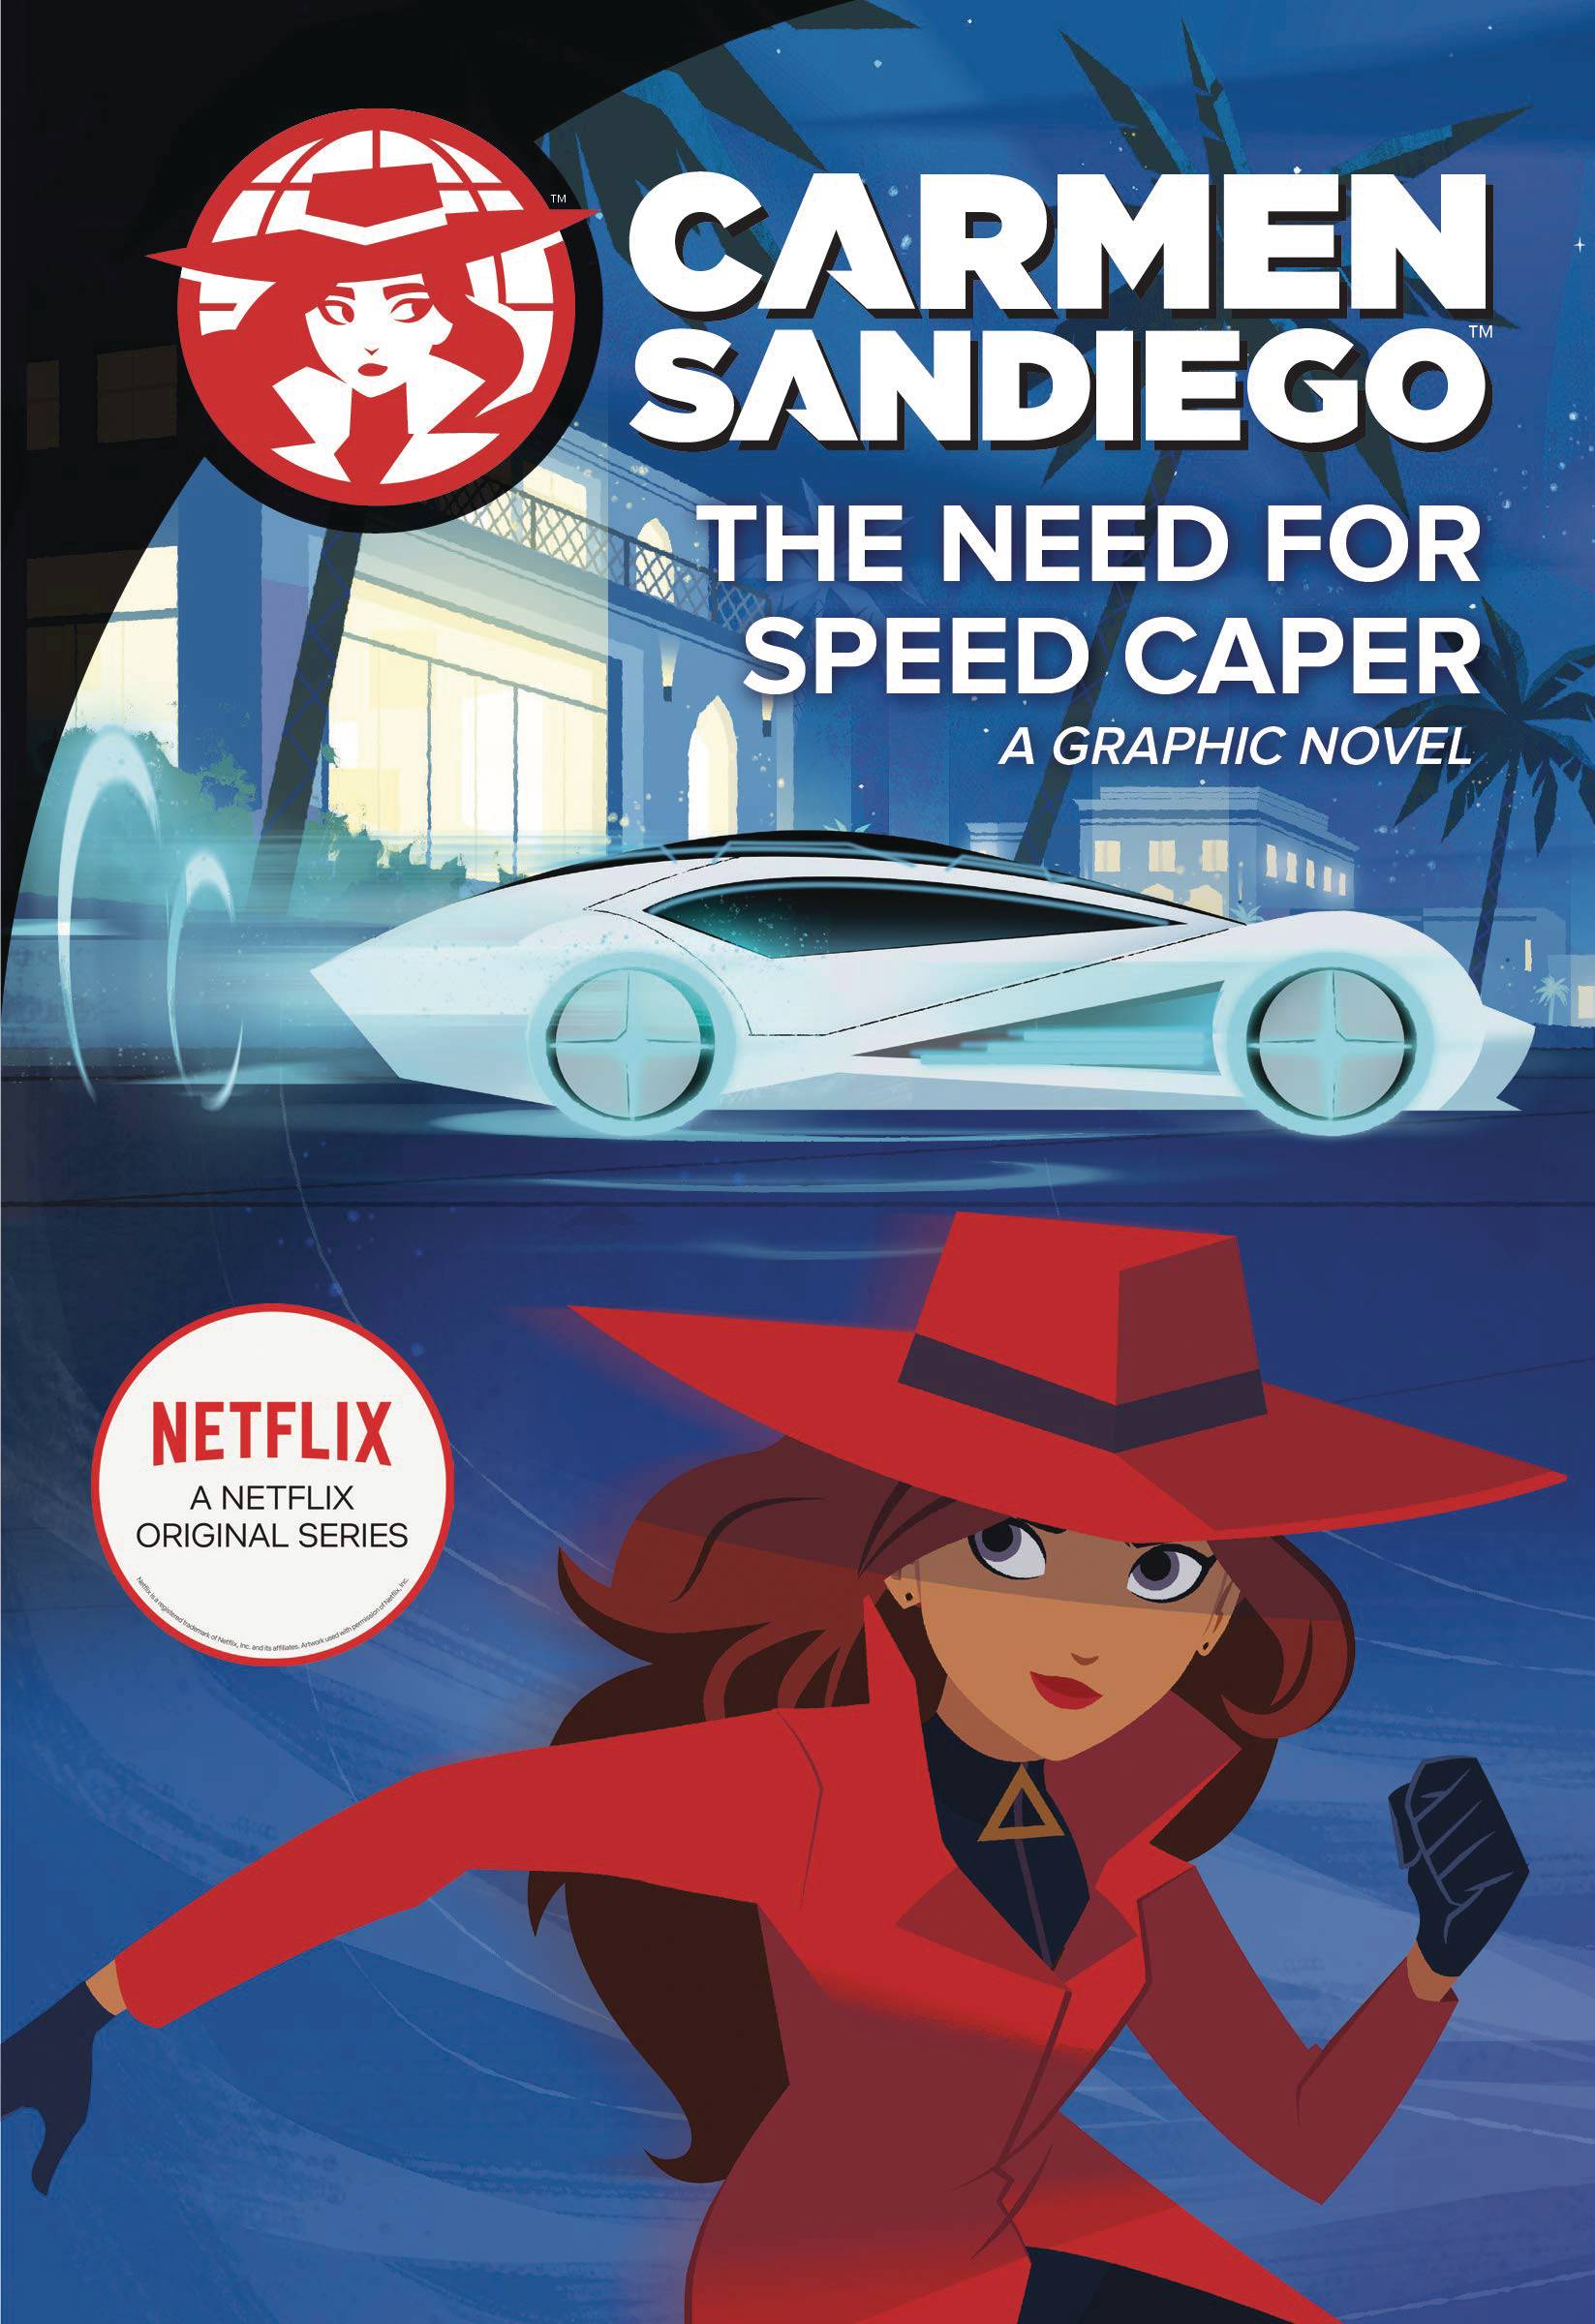 CARMEN SANDIEGO GN VOL 04 NEED FOR SPEED CAPER